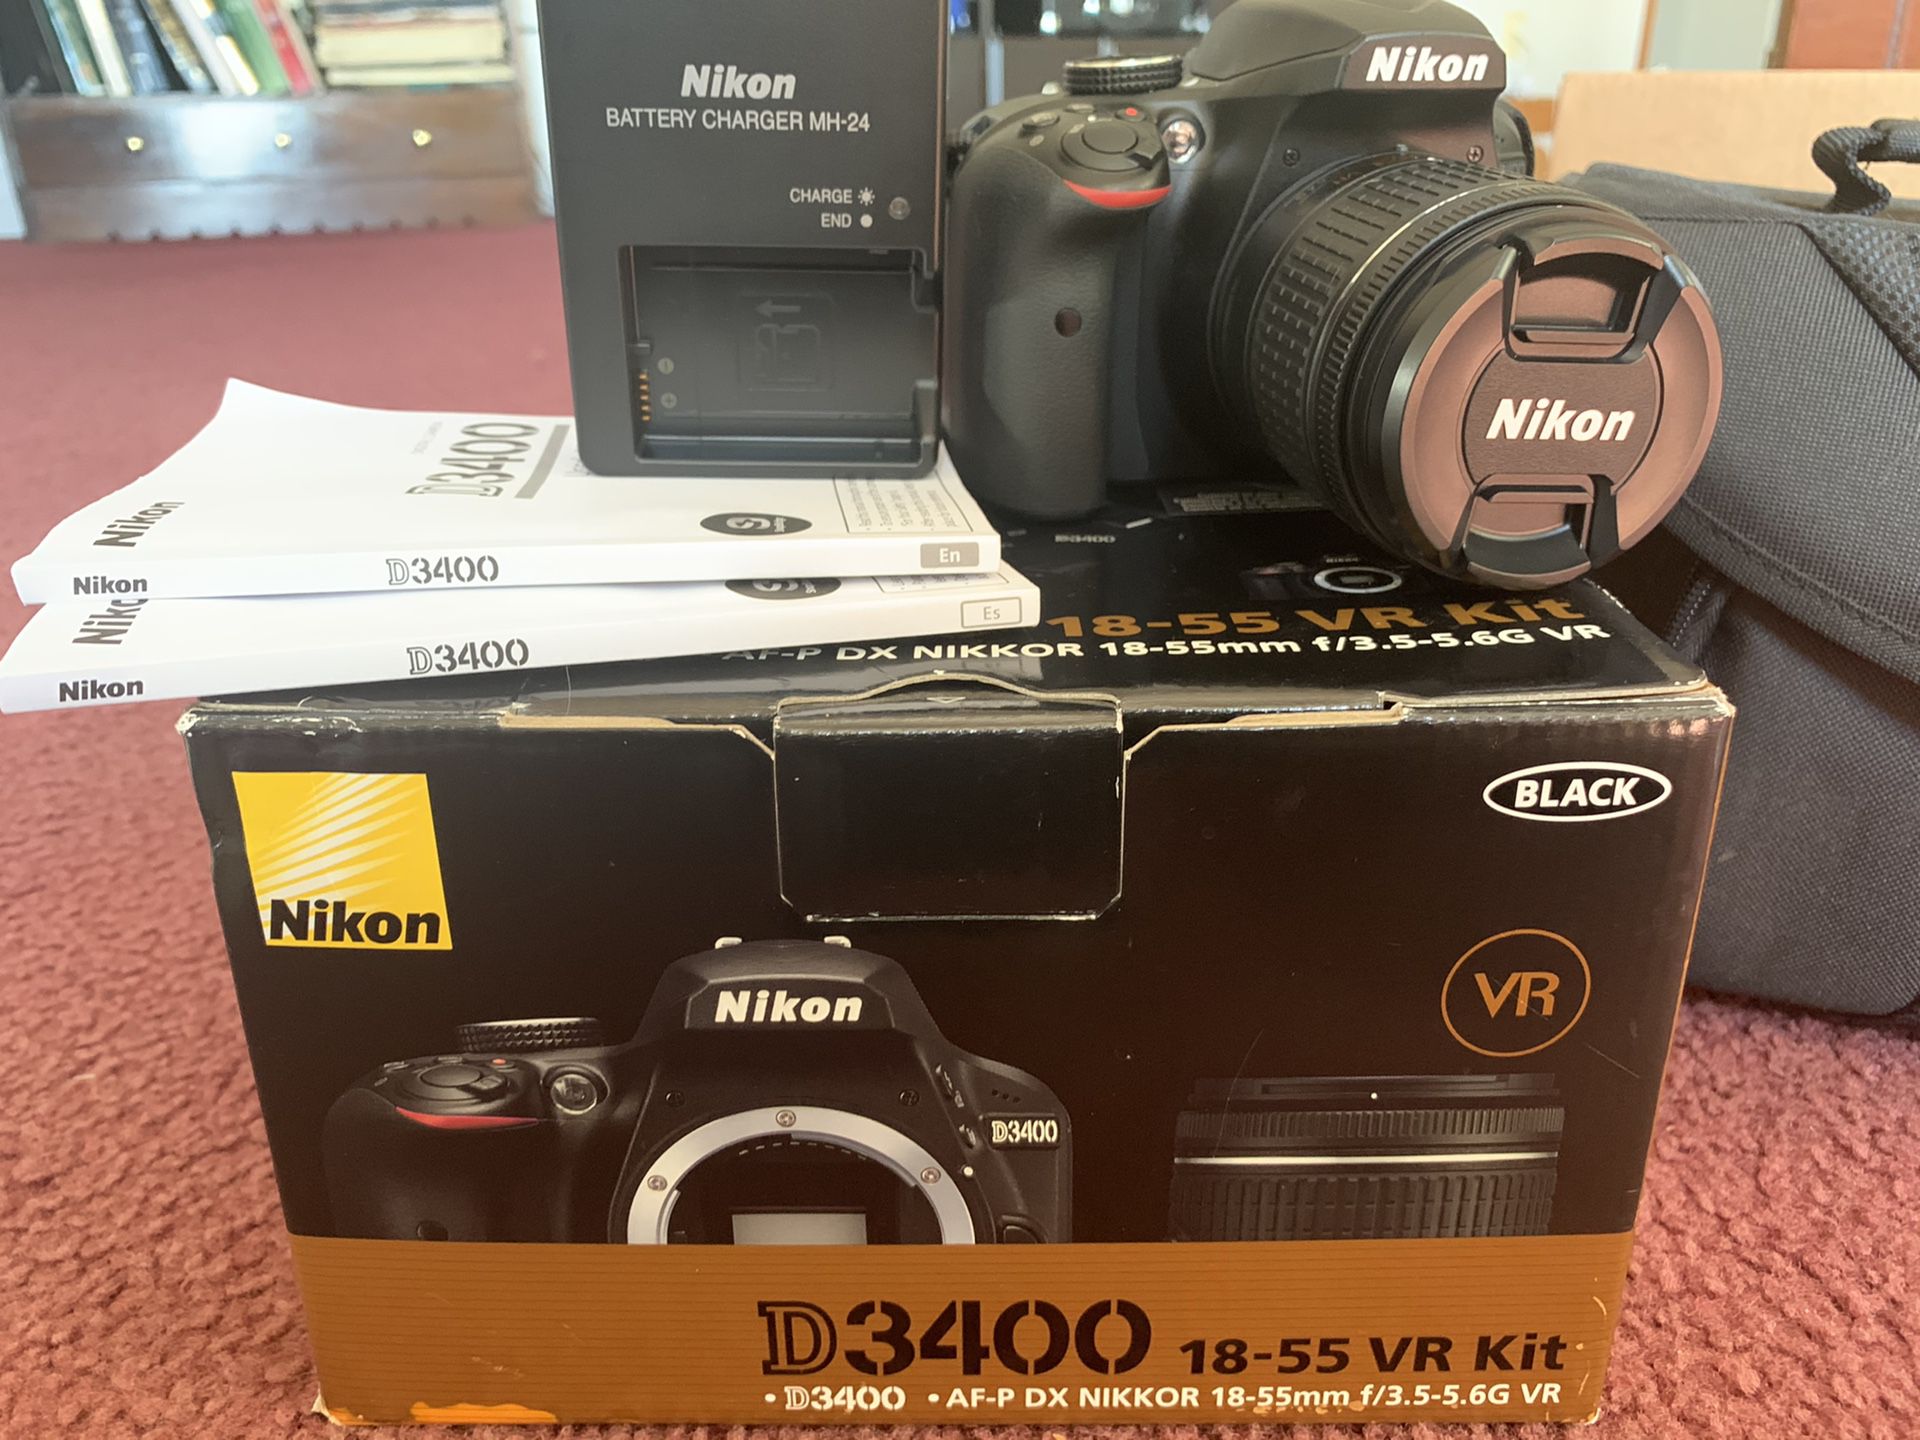 Nikon D3400 and accessories